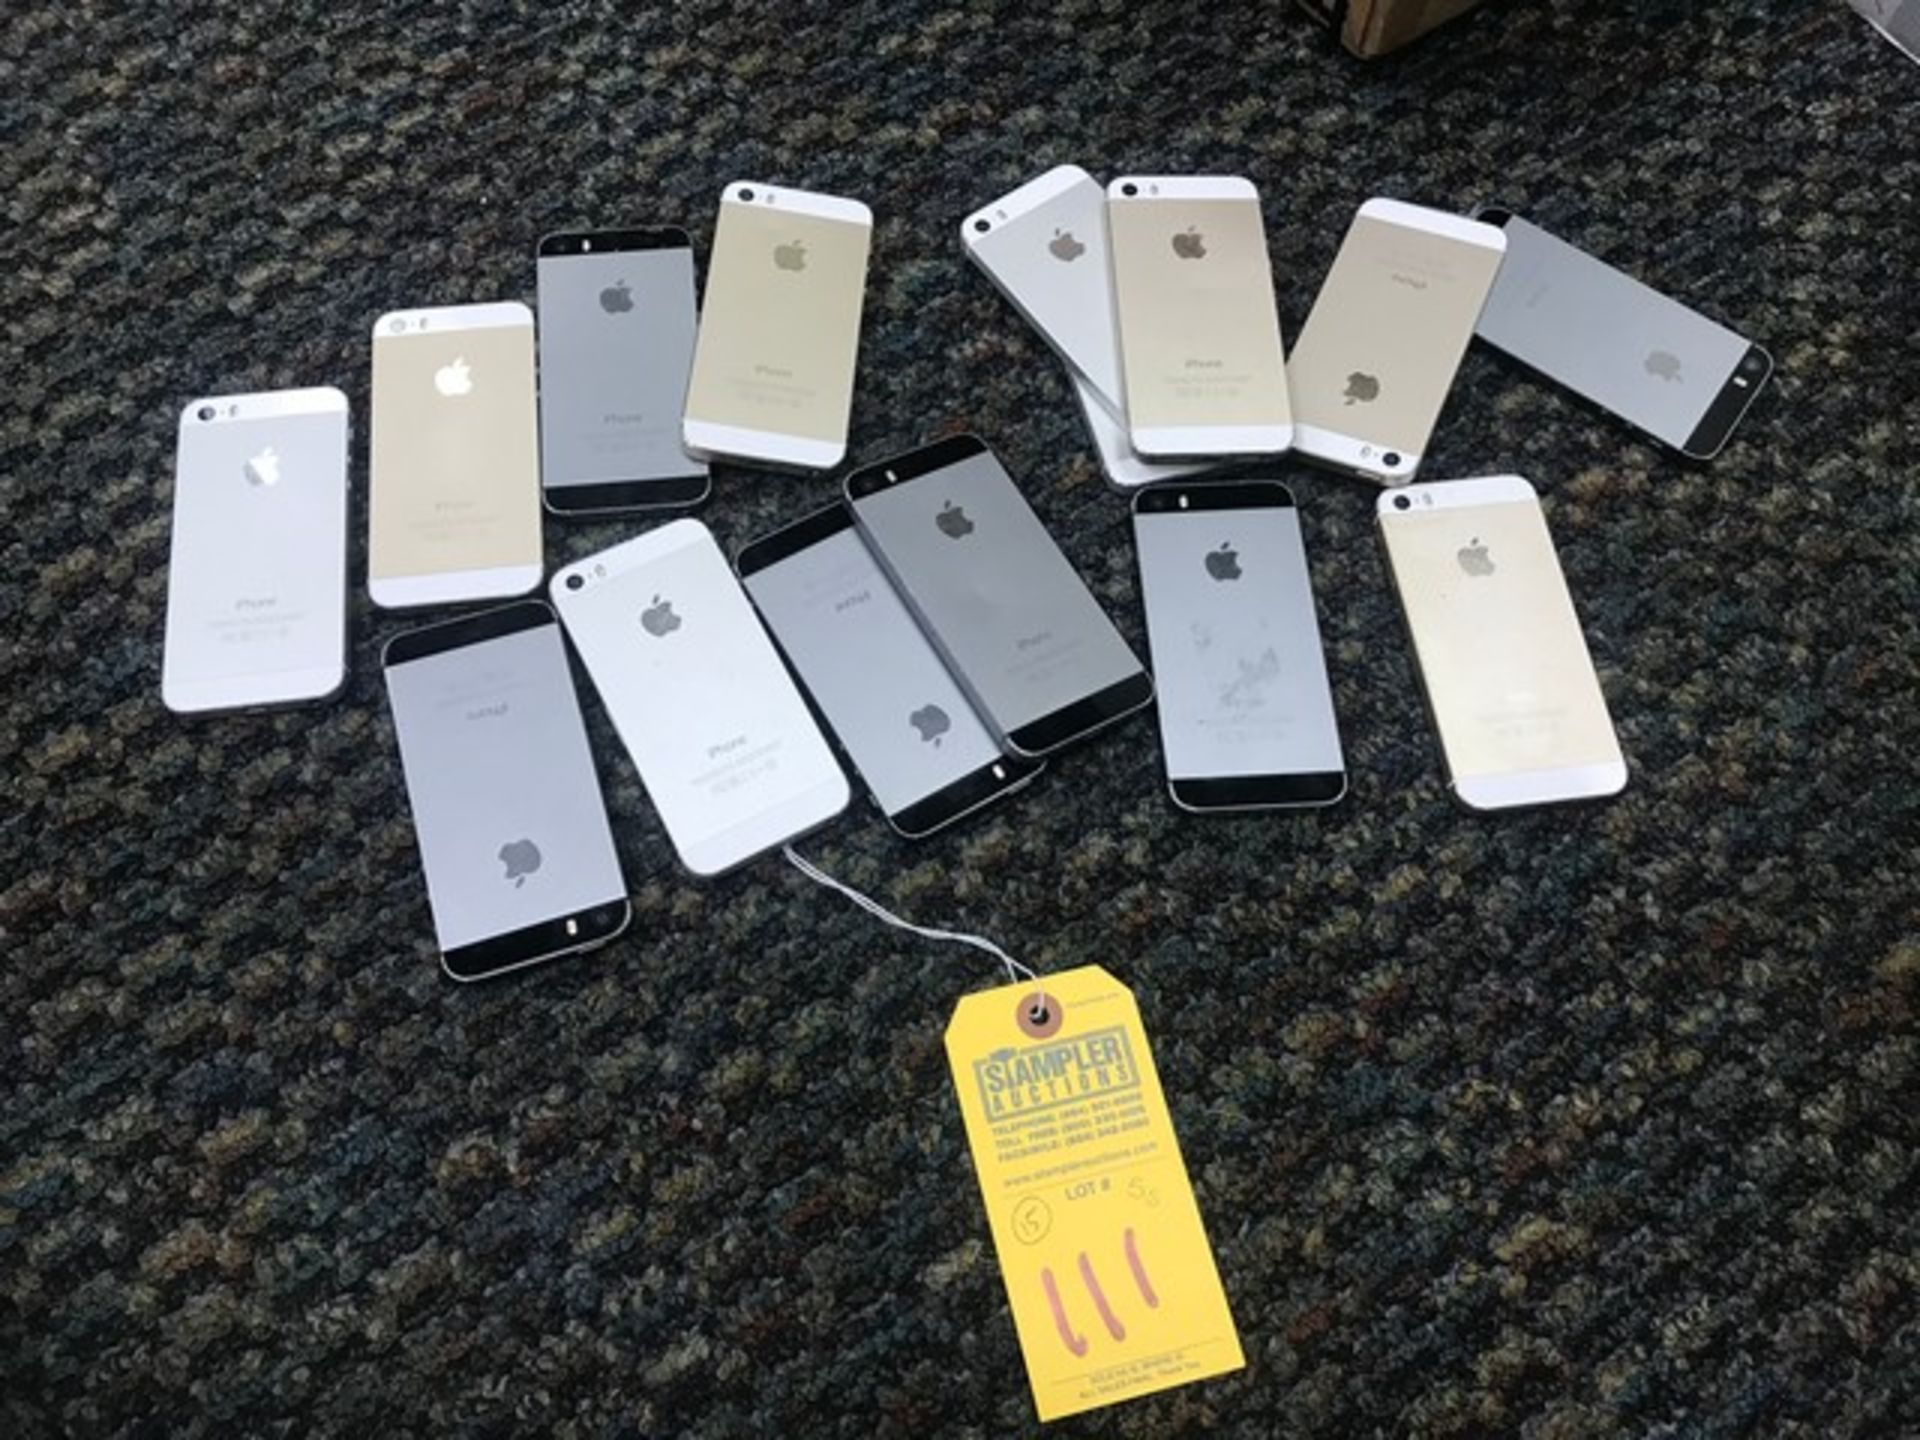 IPHONE 5S - ASSORTED COLORS